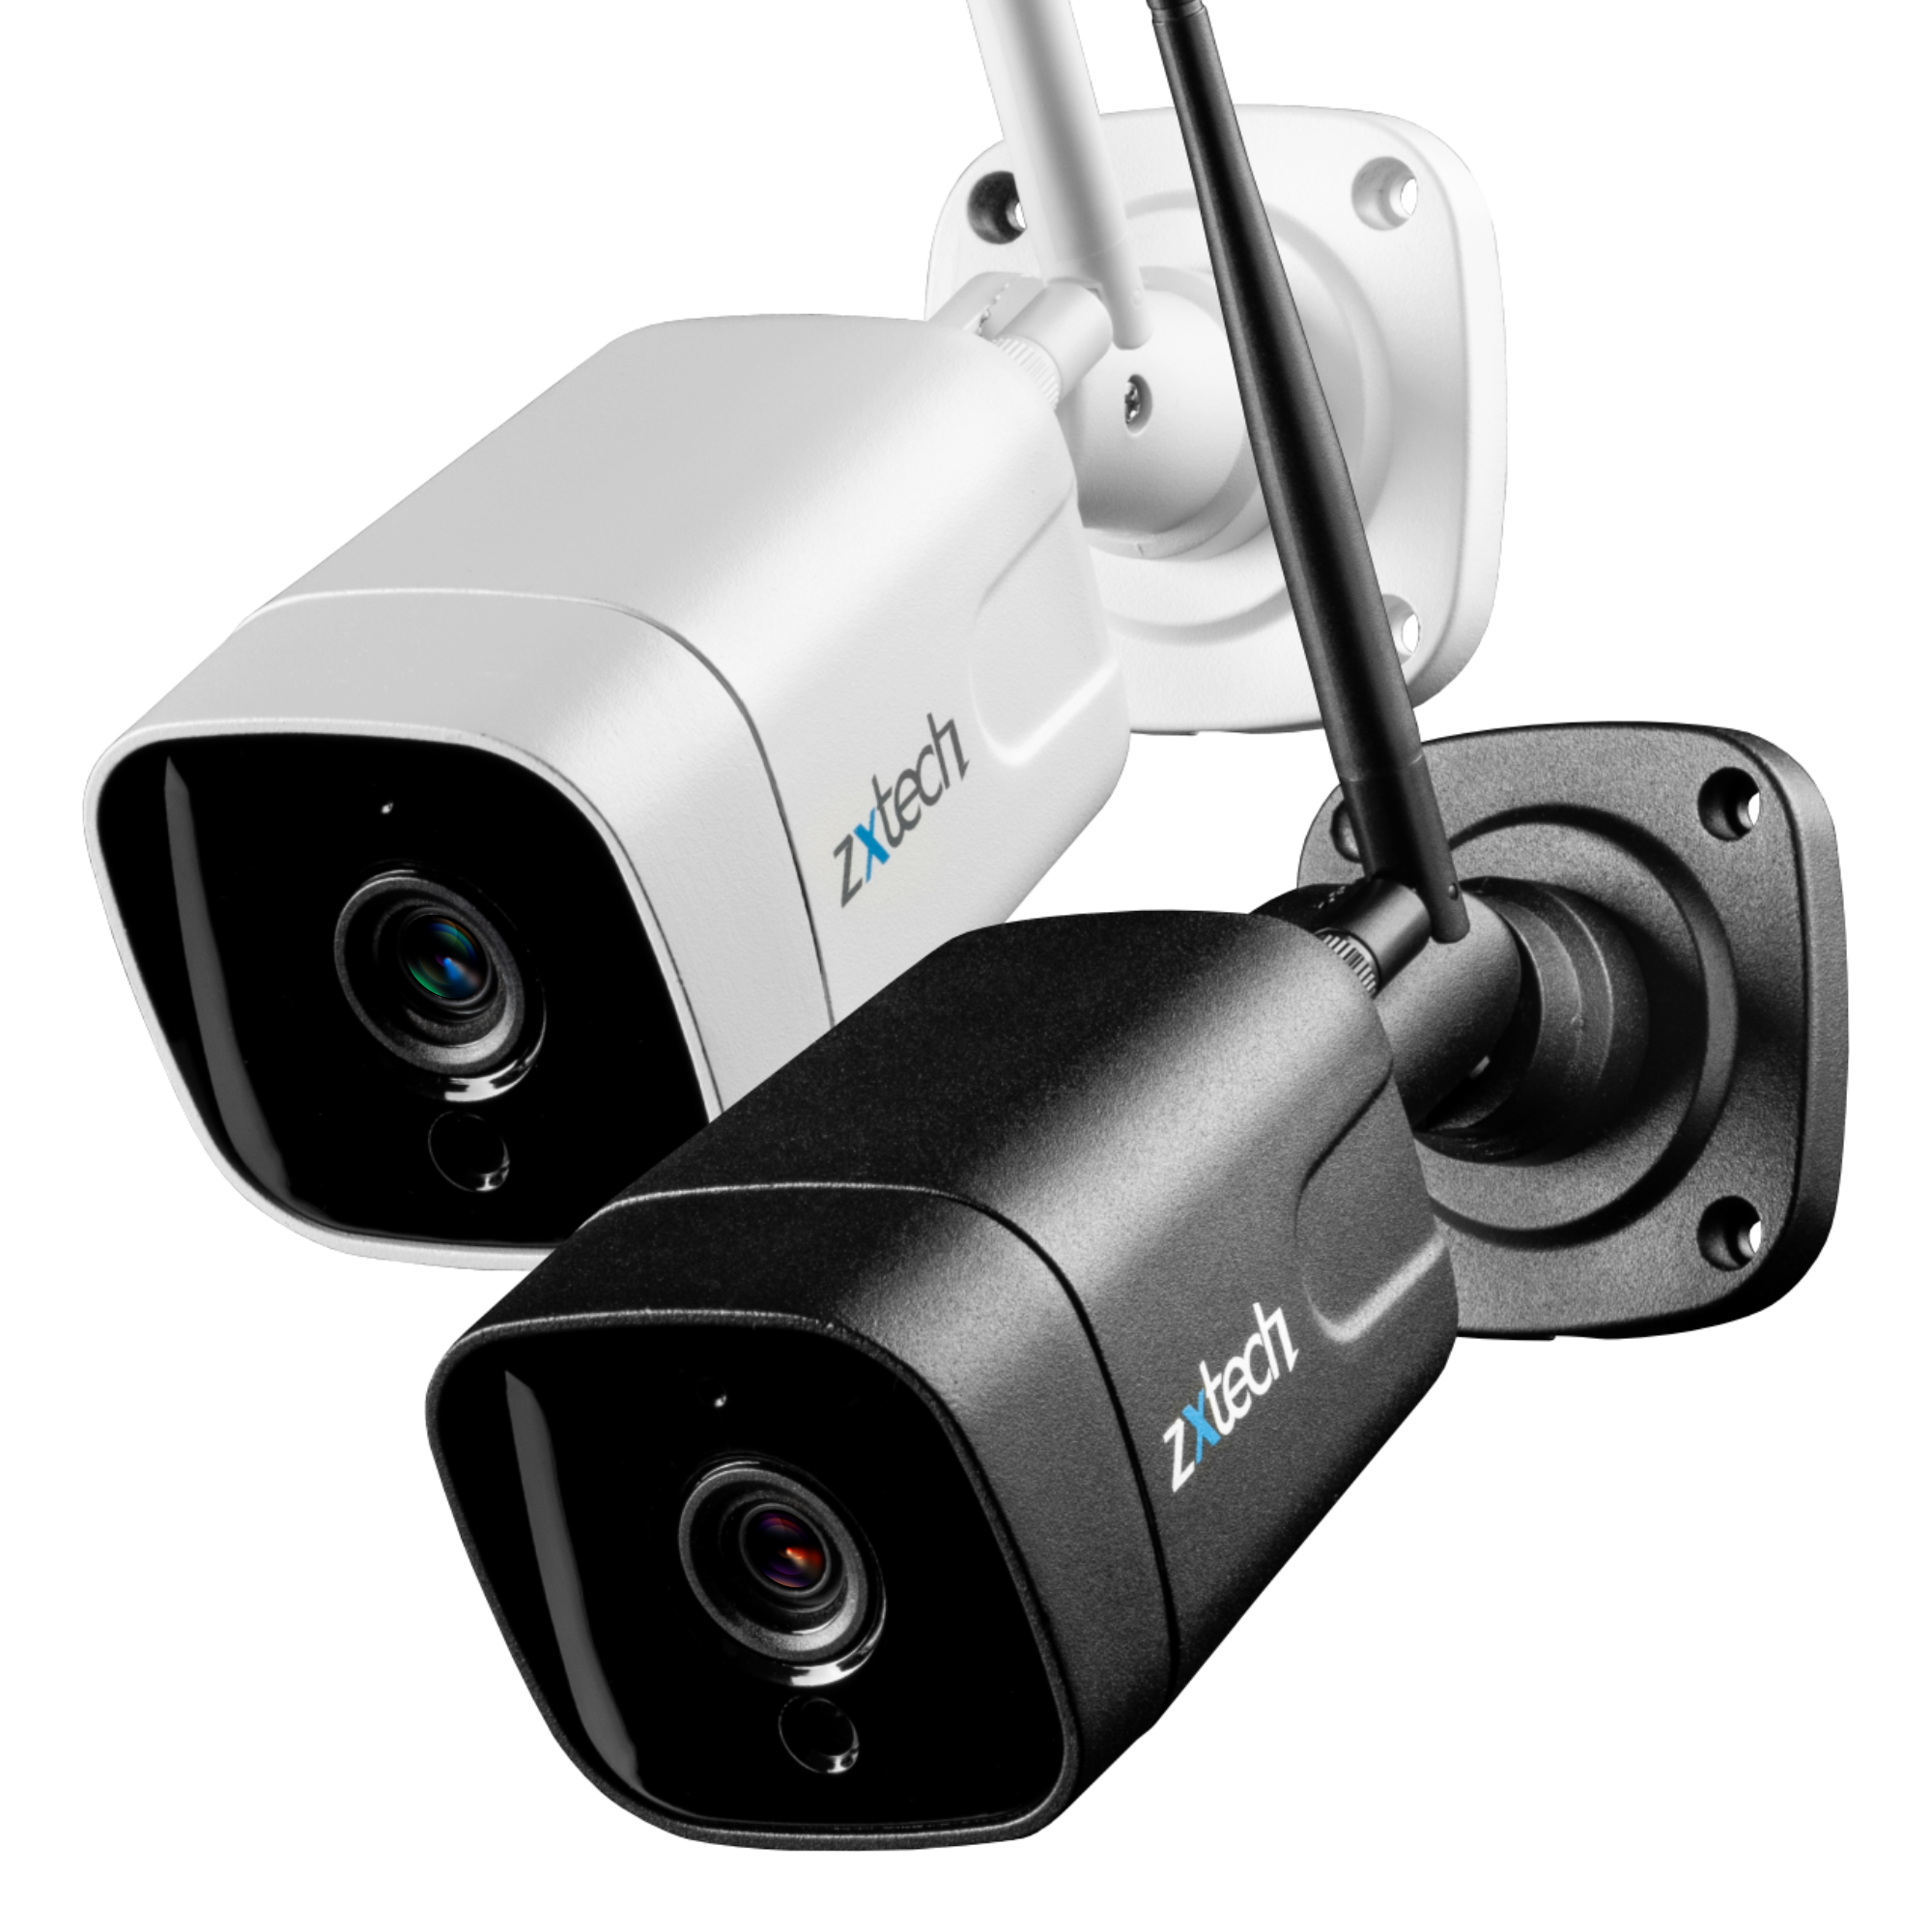 Wireless CCTV camera for home security? Here are top 10 options to choose  from